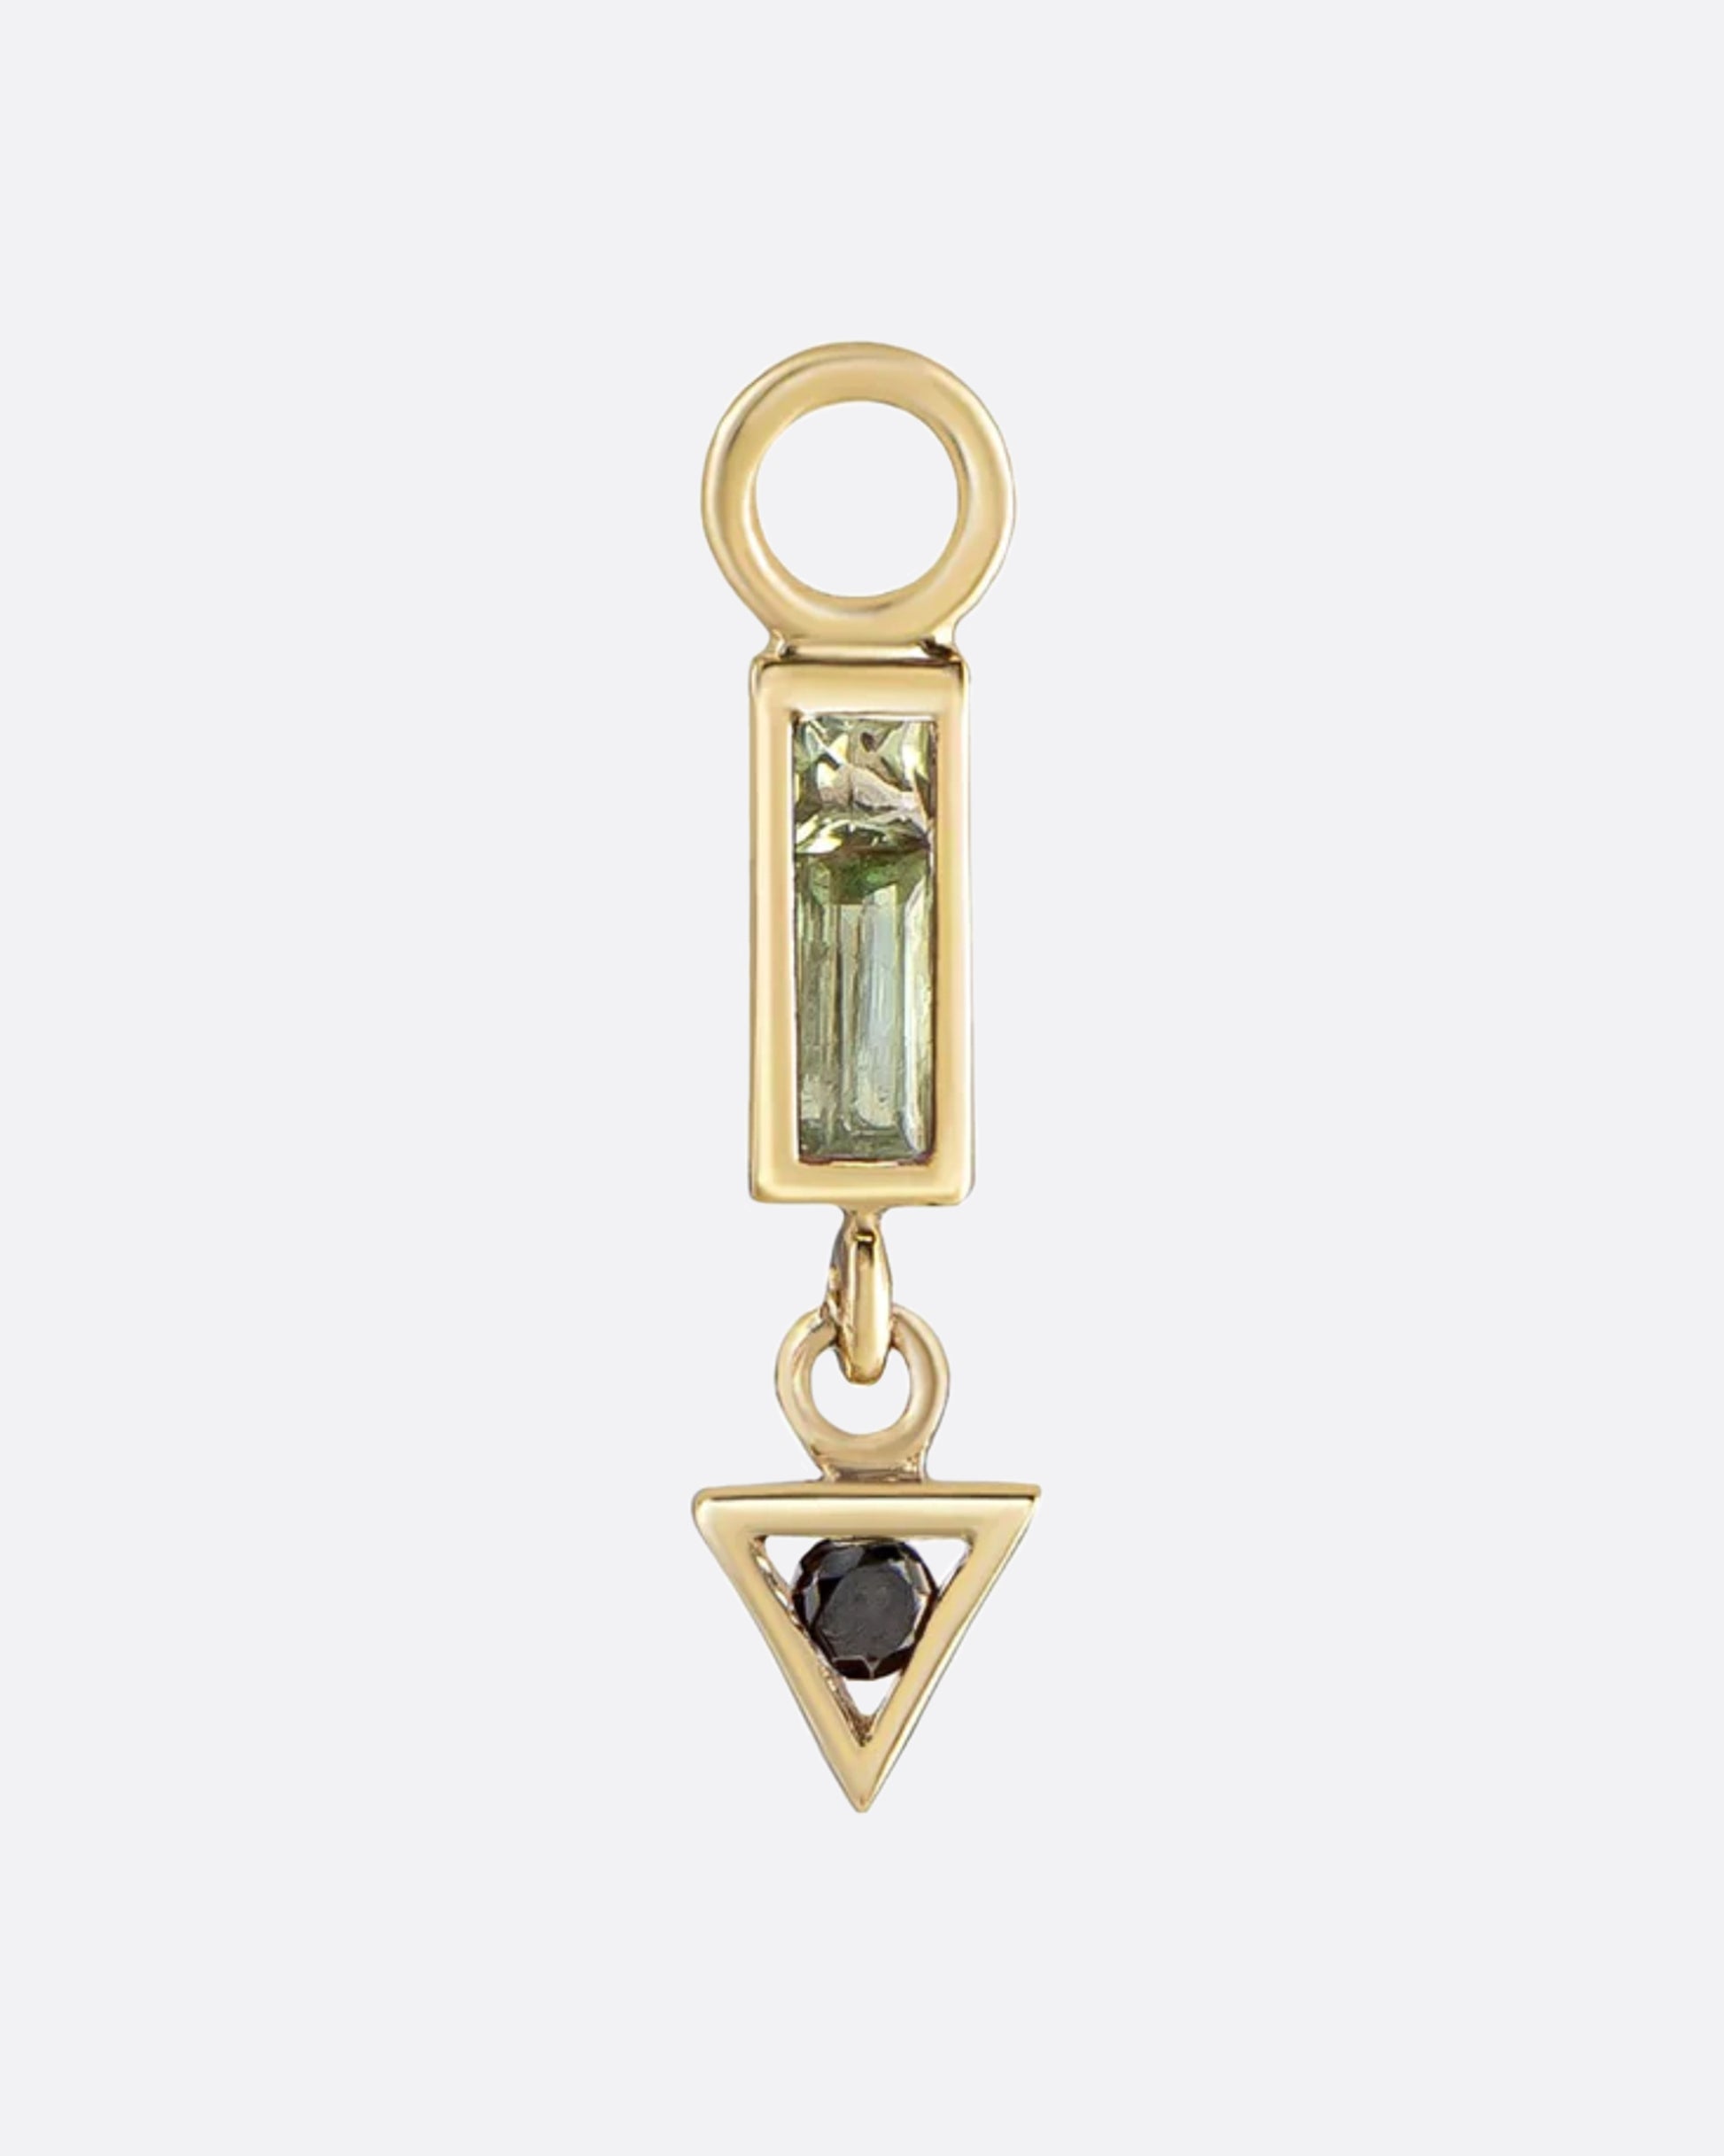 A two-tone arrow charm in shades of green and black with a bit dark, a little color, yet still kind of neutral; the best of all worlds.